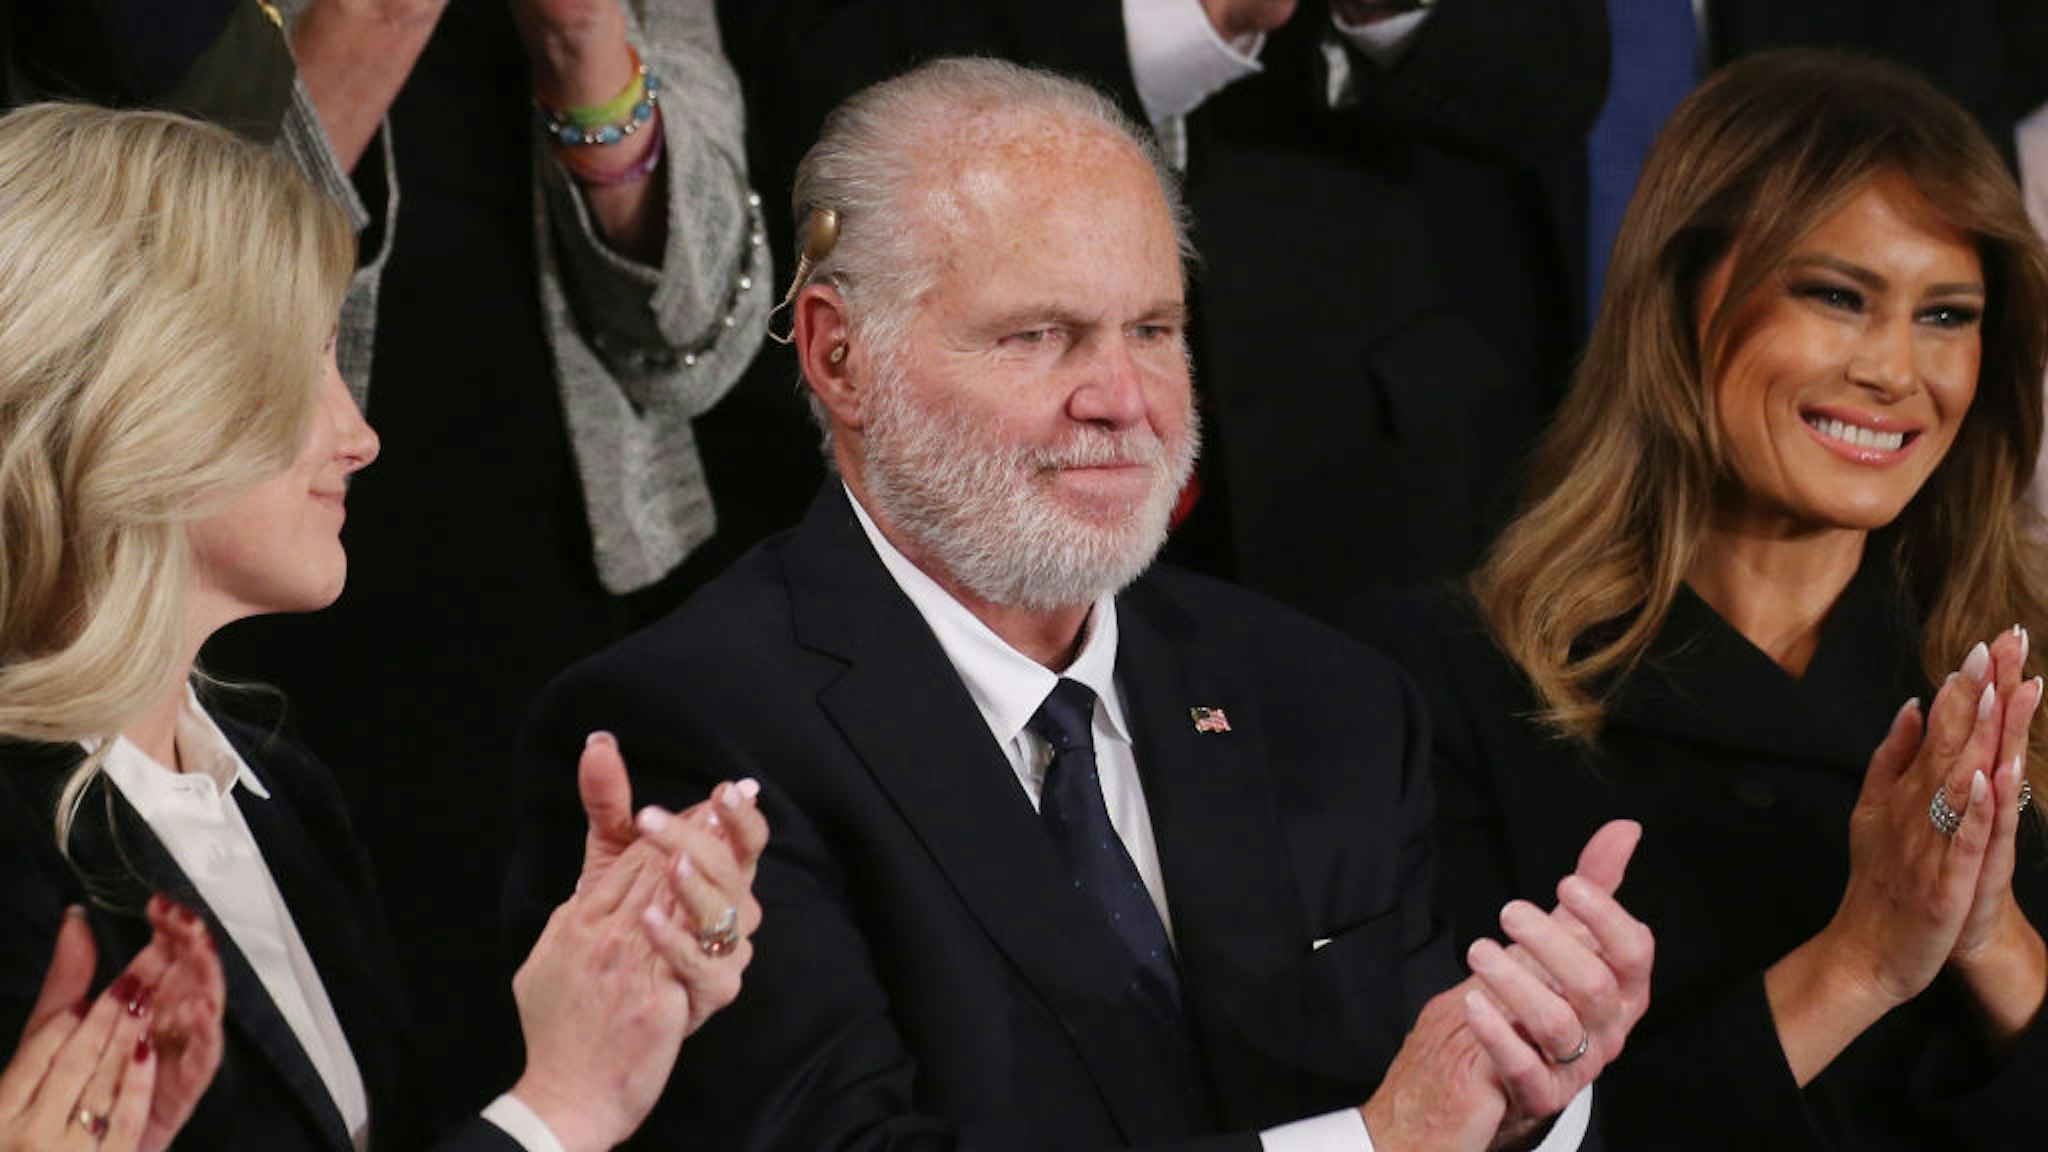 Radio personality Rush Limbaugh and wife Kathryn (L) attend the State of the Union address with First Lady Melania Trump in the chamber of the U.S. House of Representatives on February 04, 2020 in Washington, DC. President Trump delivers his third State of the Union to the nation the night before the U.S. Senate is set to vote in his impeachment trial. (Photo by Mario Tama/Getty Images)